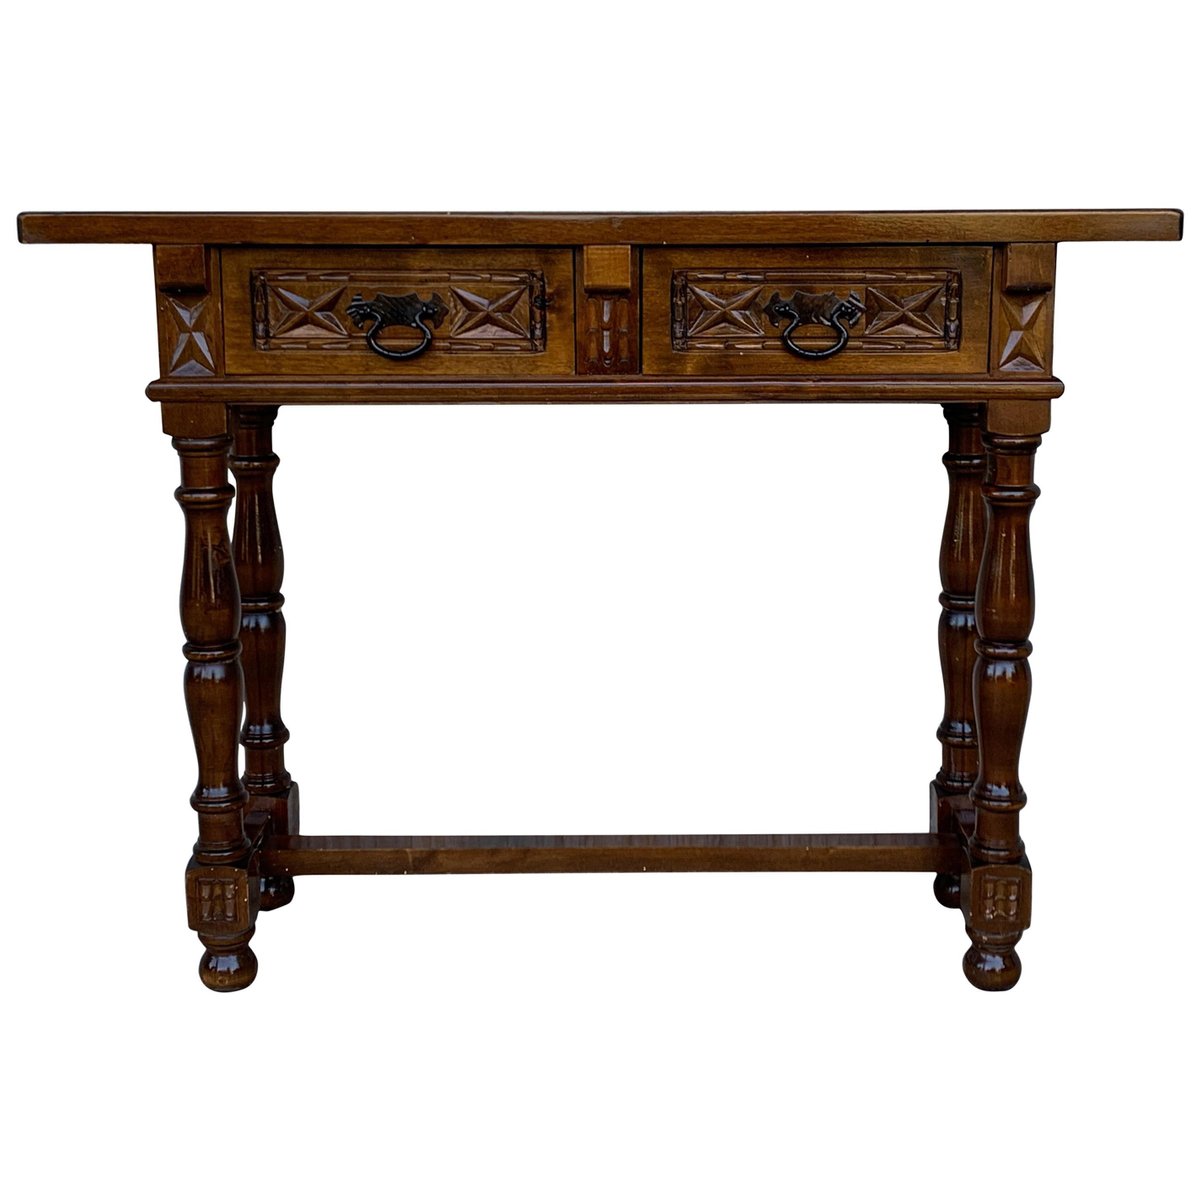 20th century spanish tuscan console table with two drawers and turned legs PSK-1002586